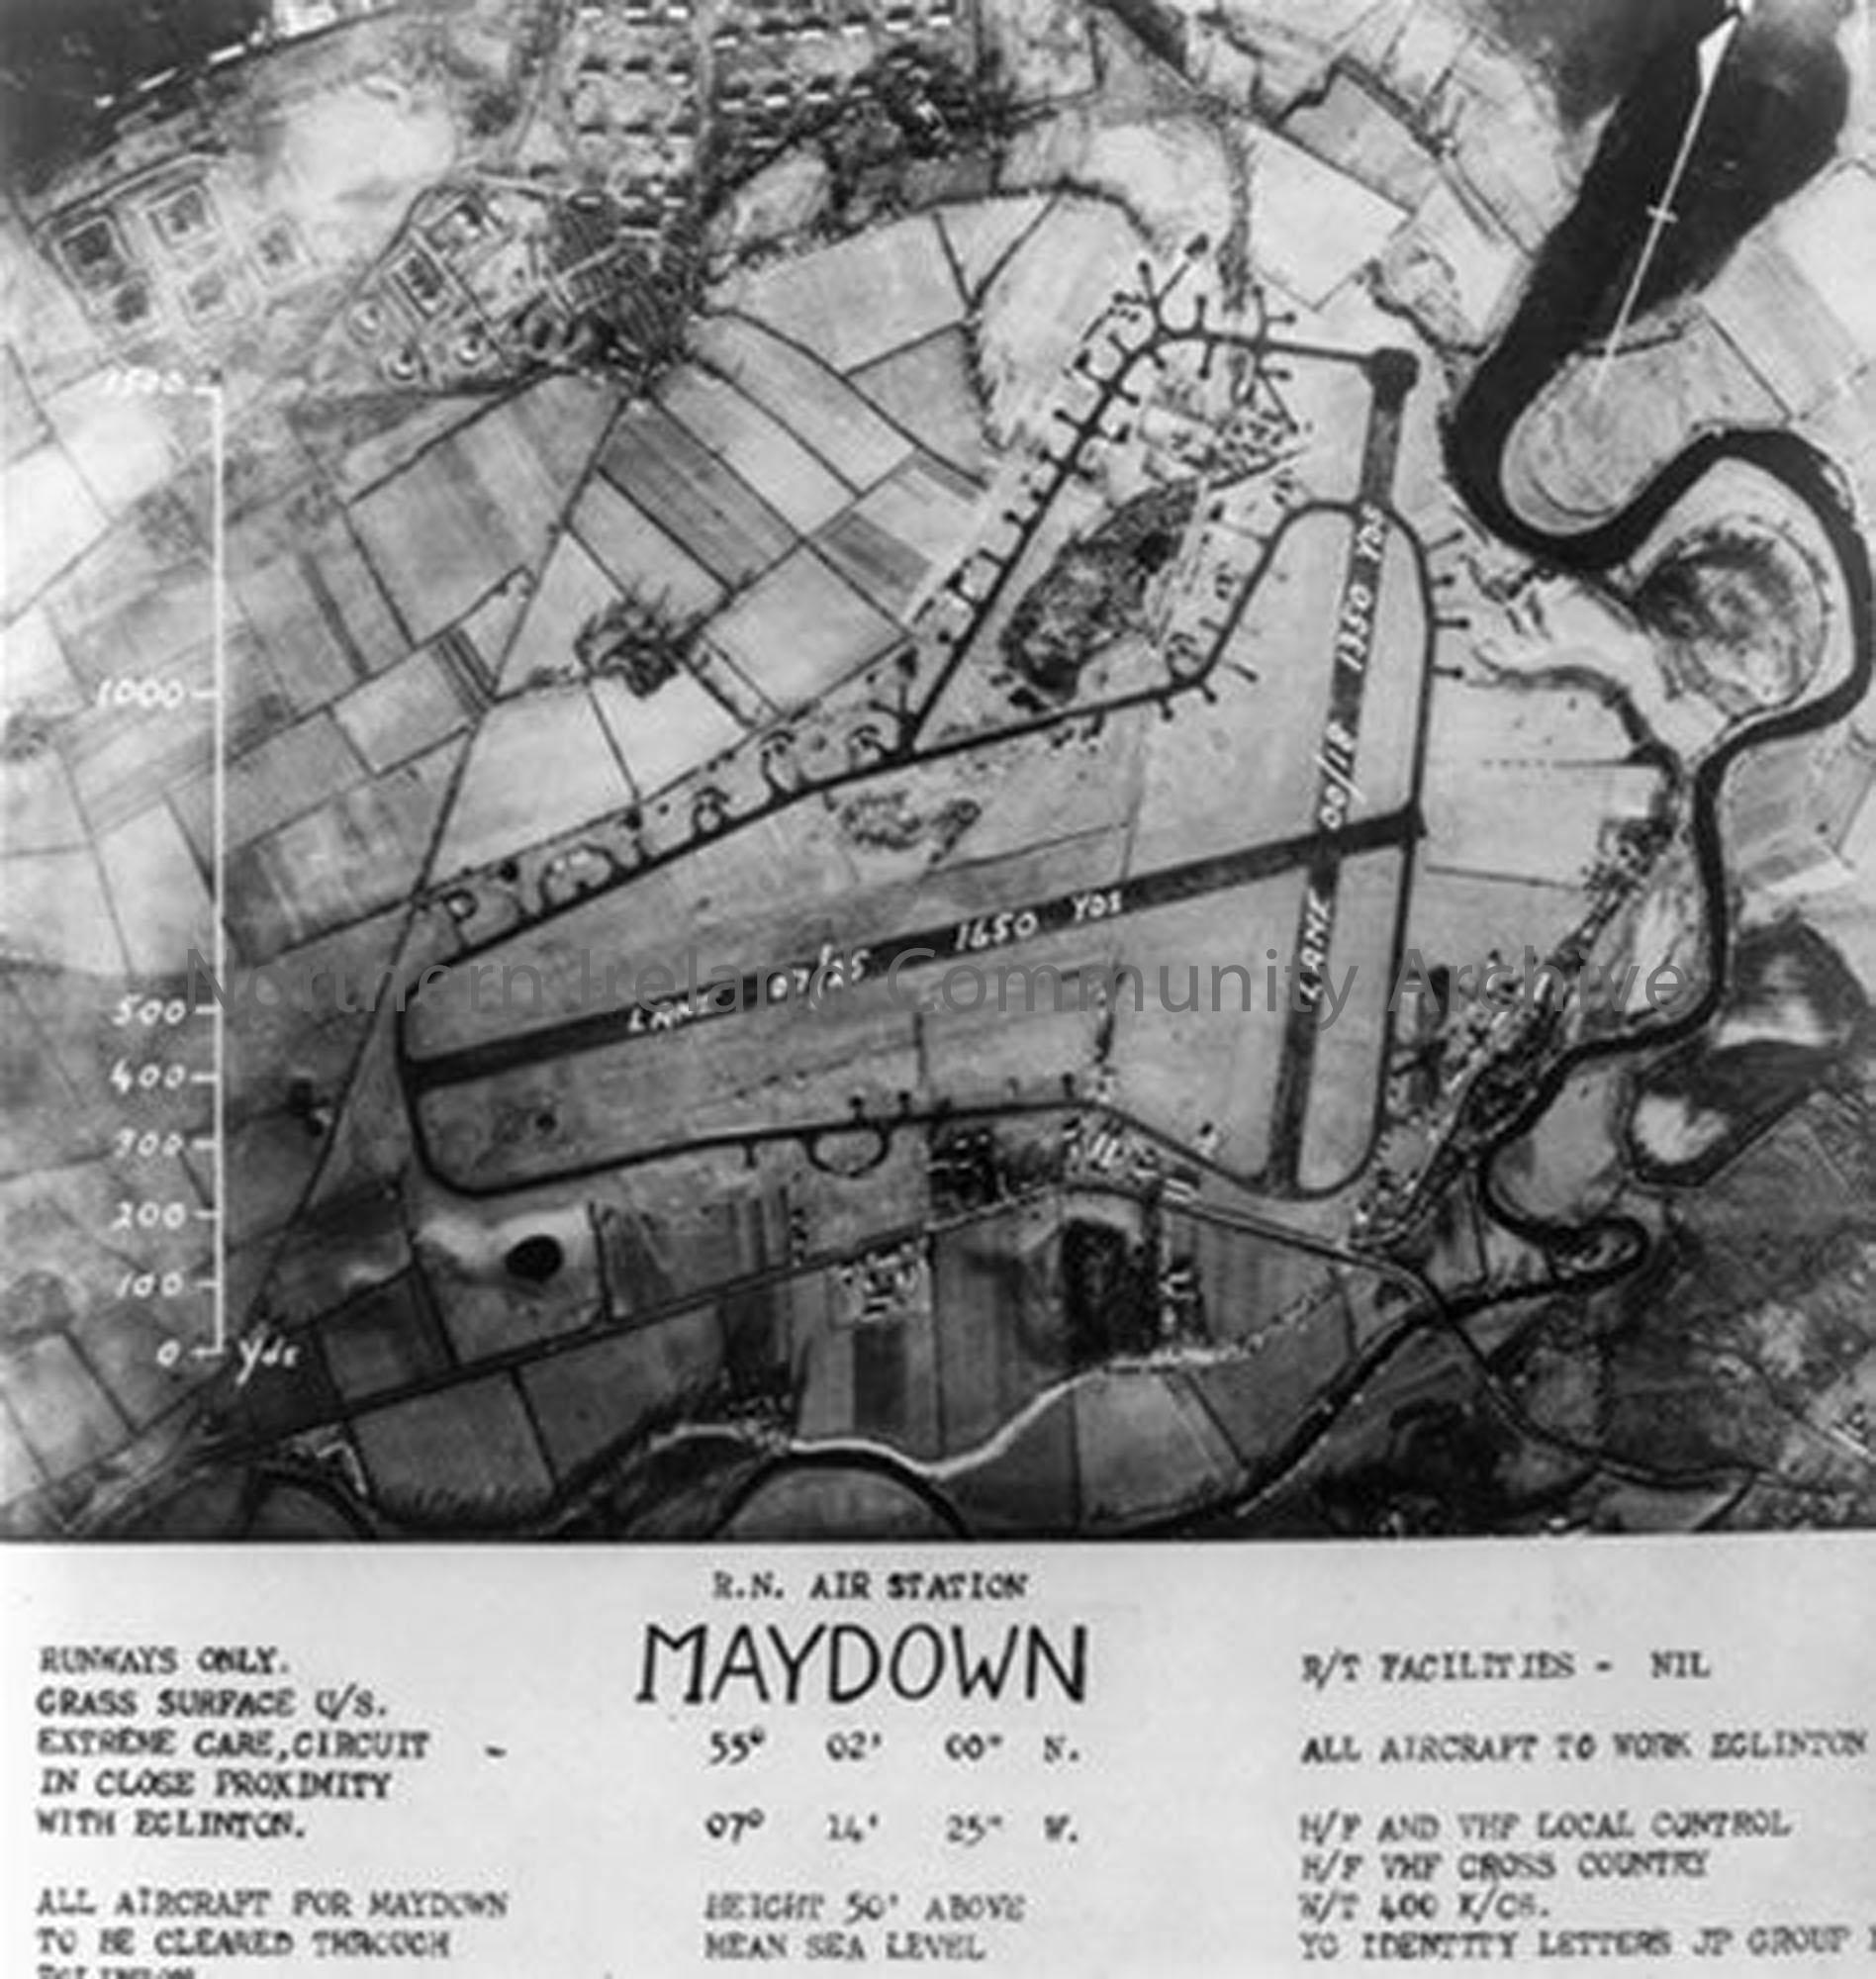 Aerial view of Maydown WW2 airfield, courtesy of Fleet Air Arm Museum Yeovilton (4002)